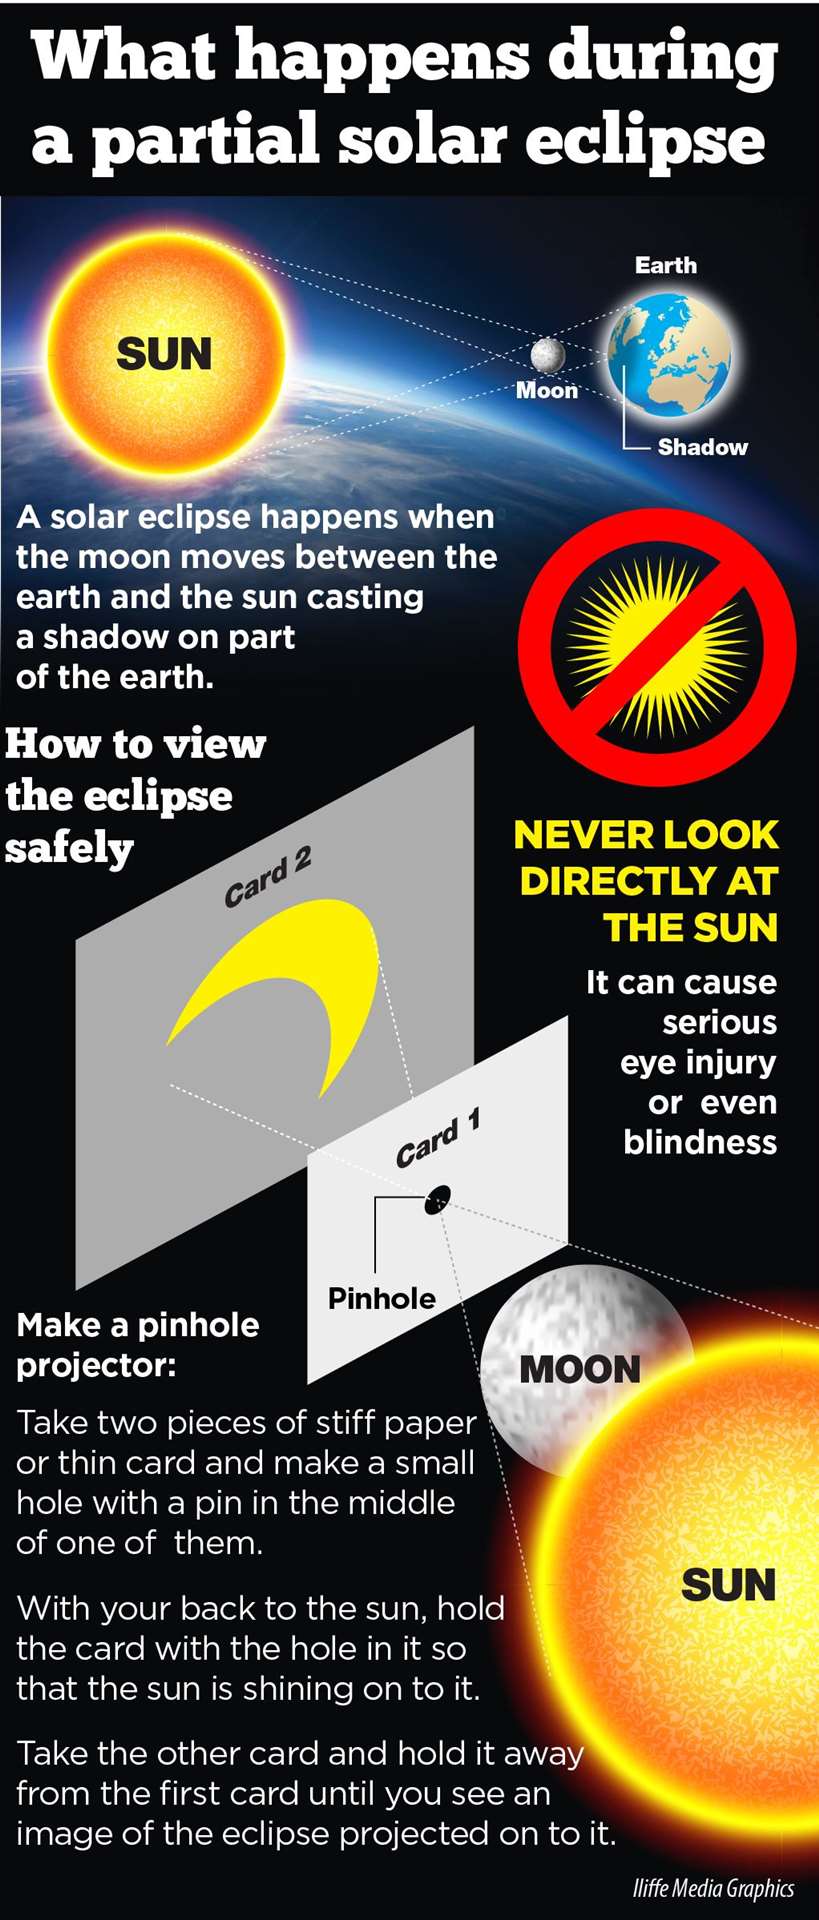 A partial solar eclipse will take place on October 25 but people should not look directly at the sun